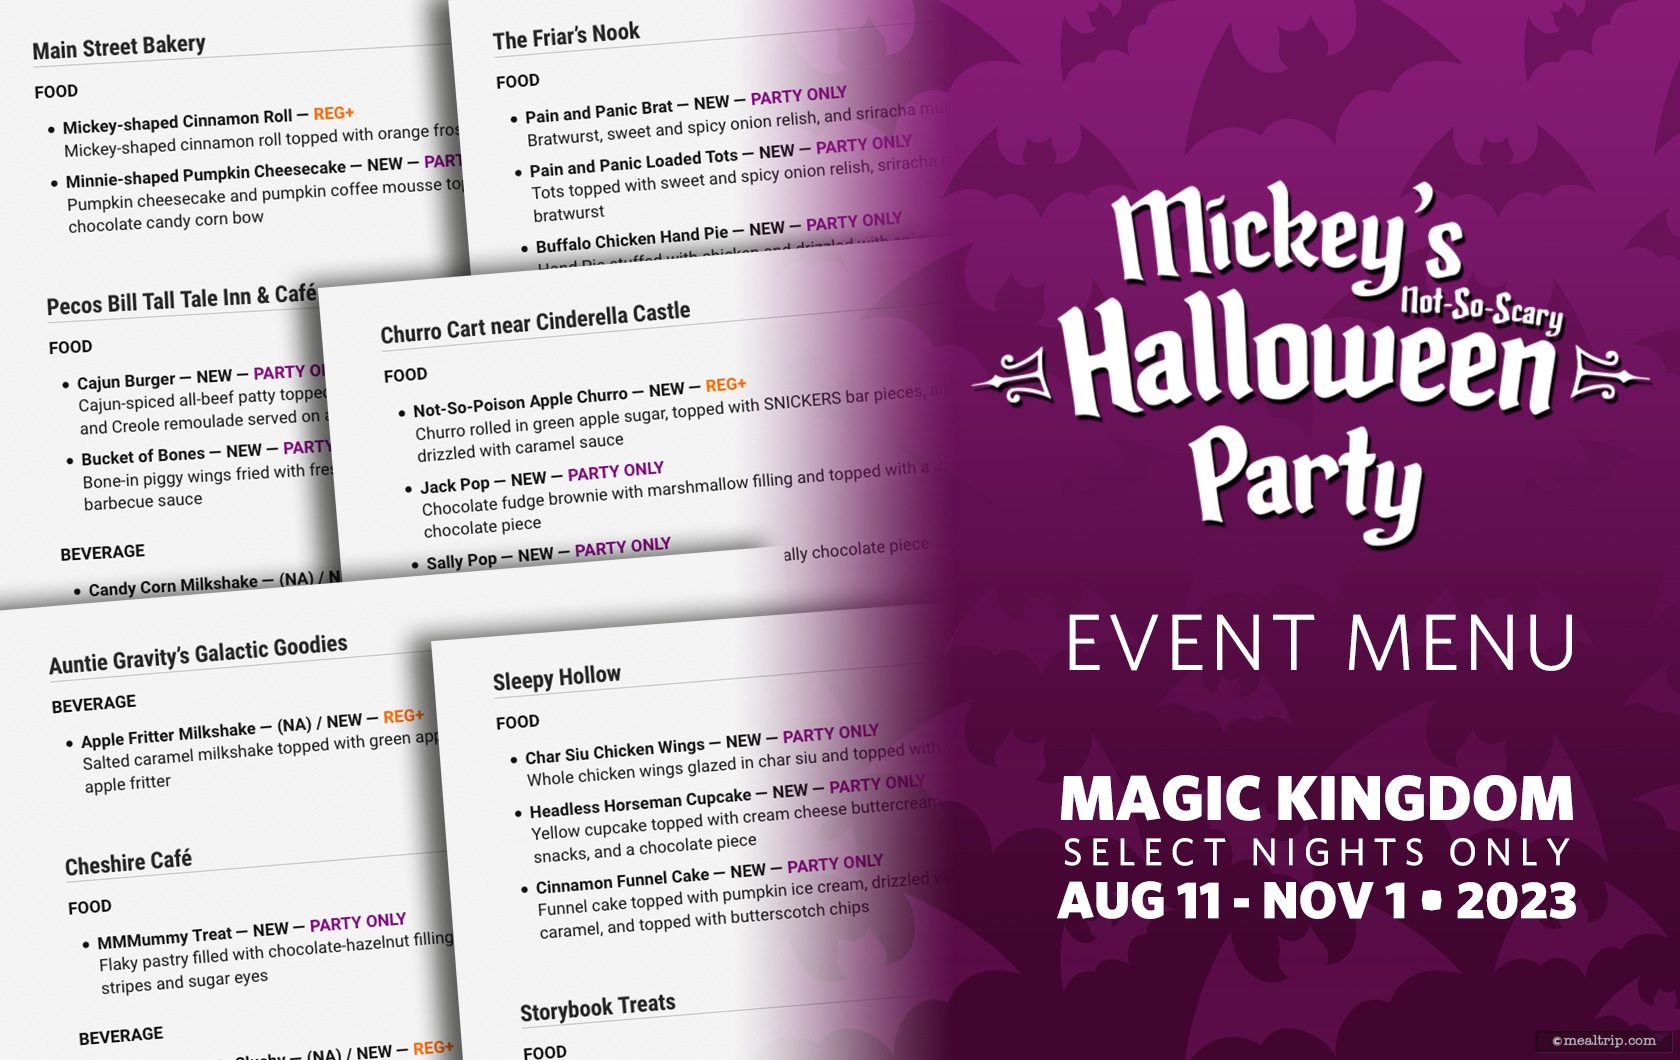 Food & Beverage Menu Items for Mickey's Not So Scary Halloween Party (MNSSHP) 2023